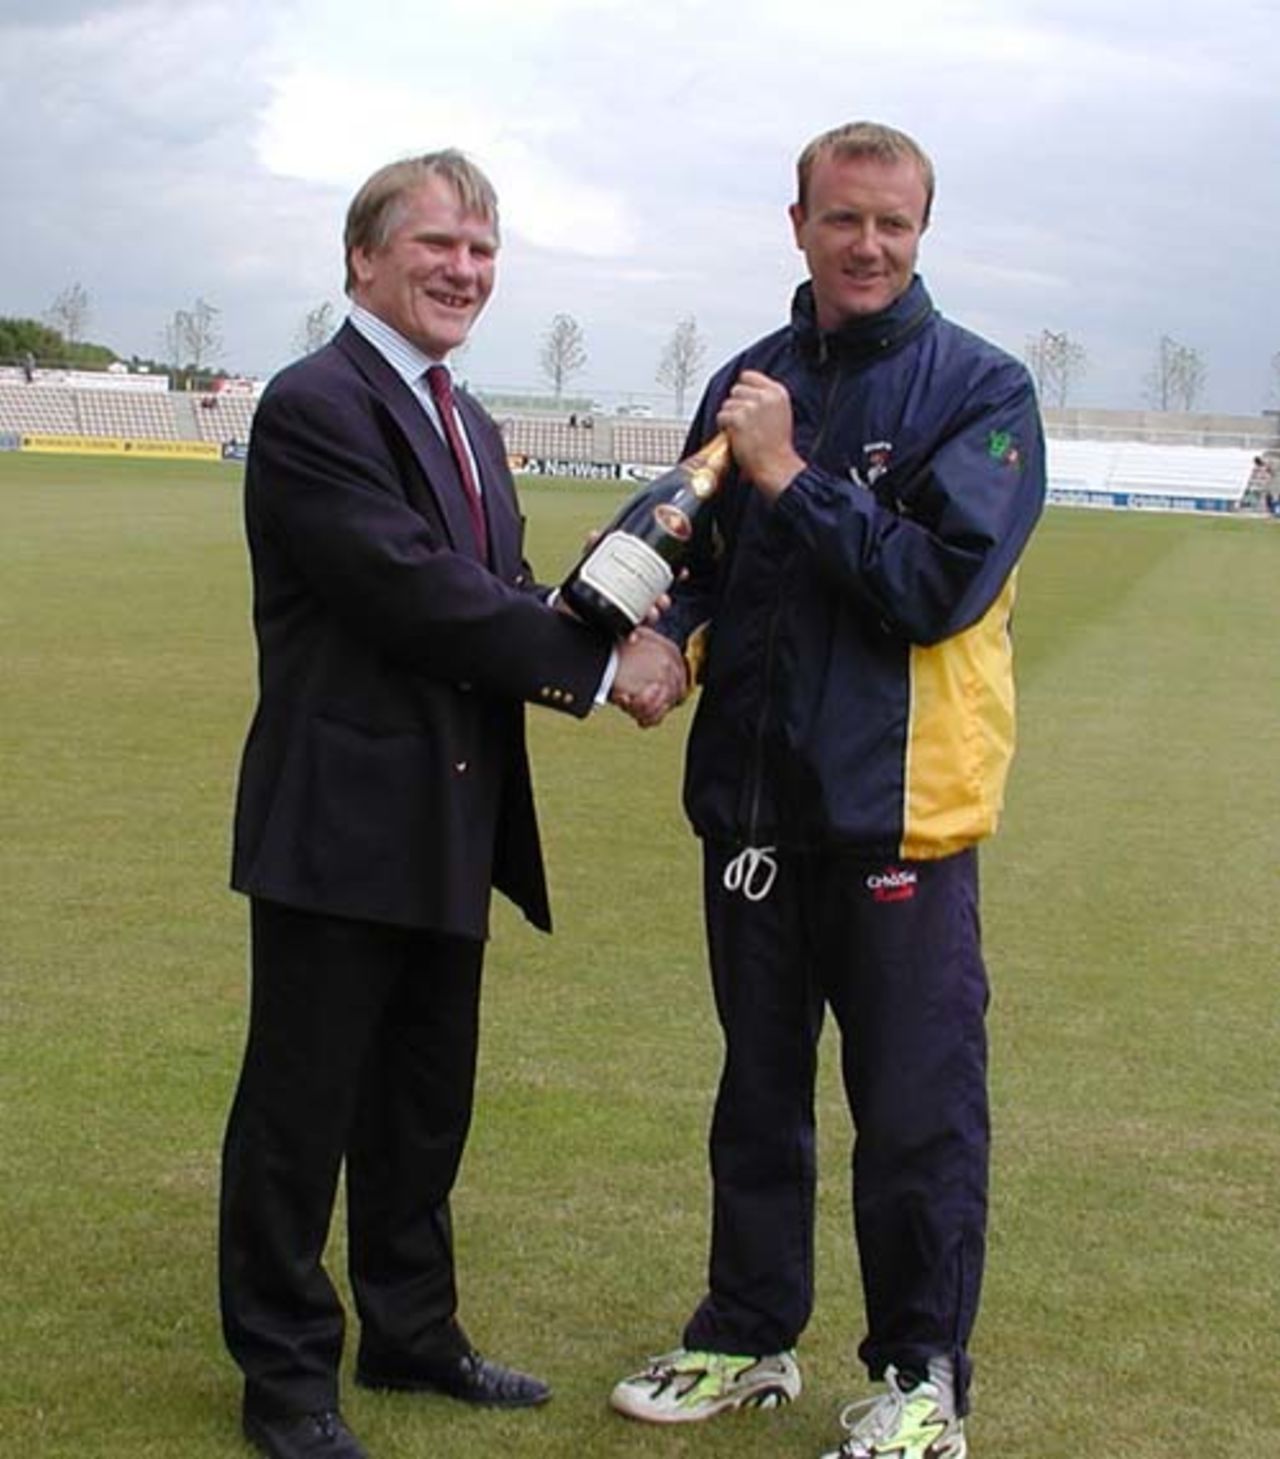 Shaun Udal receives a magnum of Laurent Perrier champagne for his match winning Seven for 74 against Derbyshire, from Mr.Charles Ridler of Laurent Perrier.